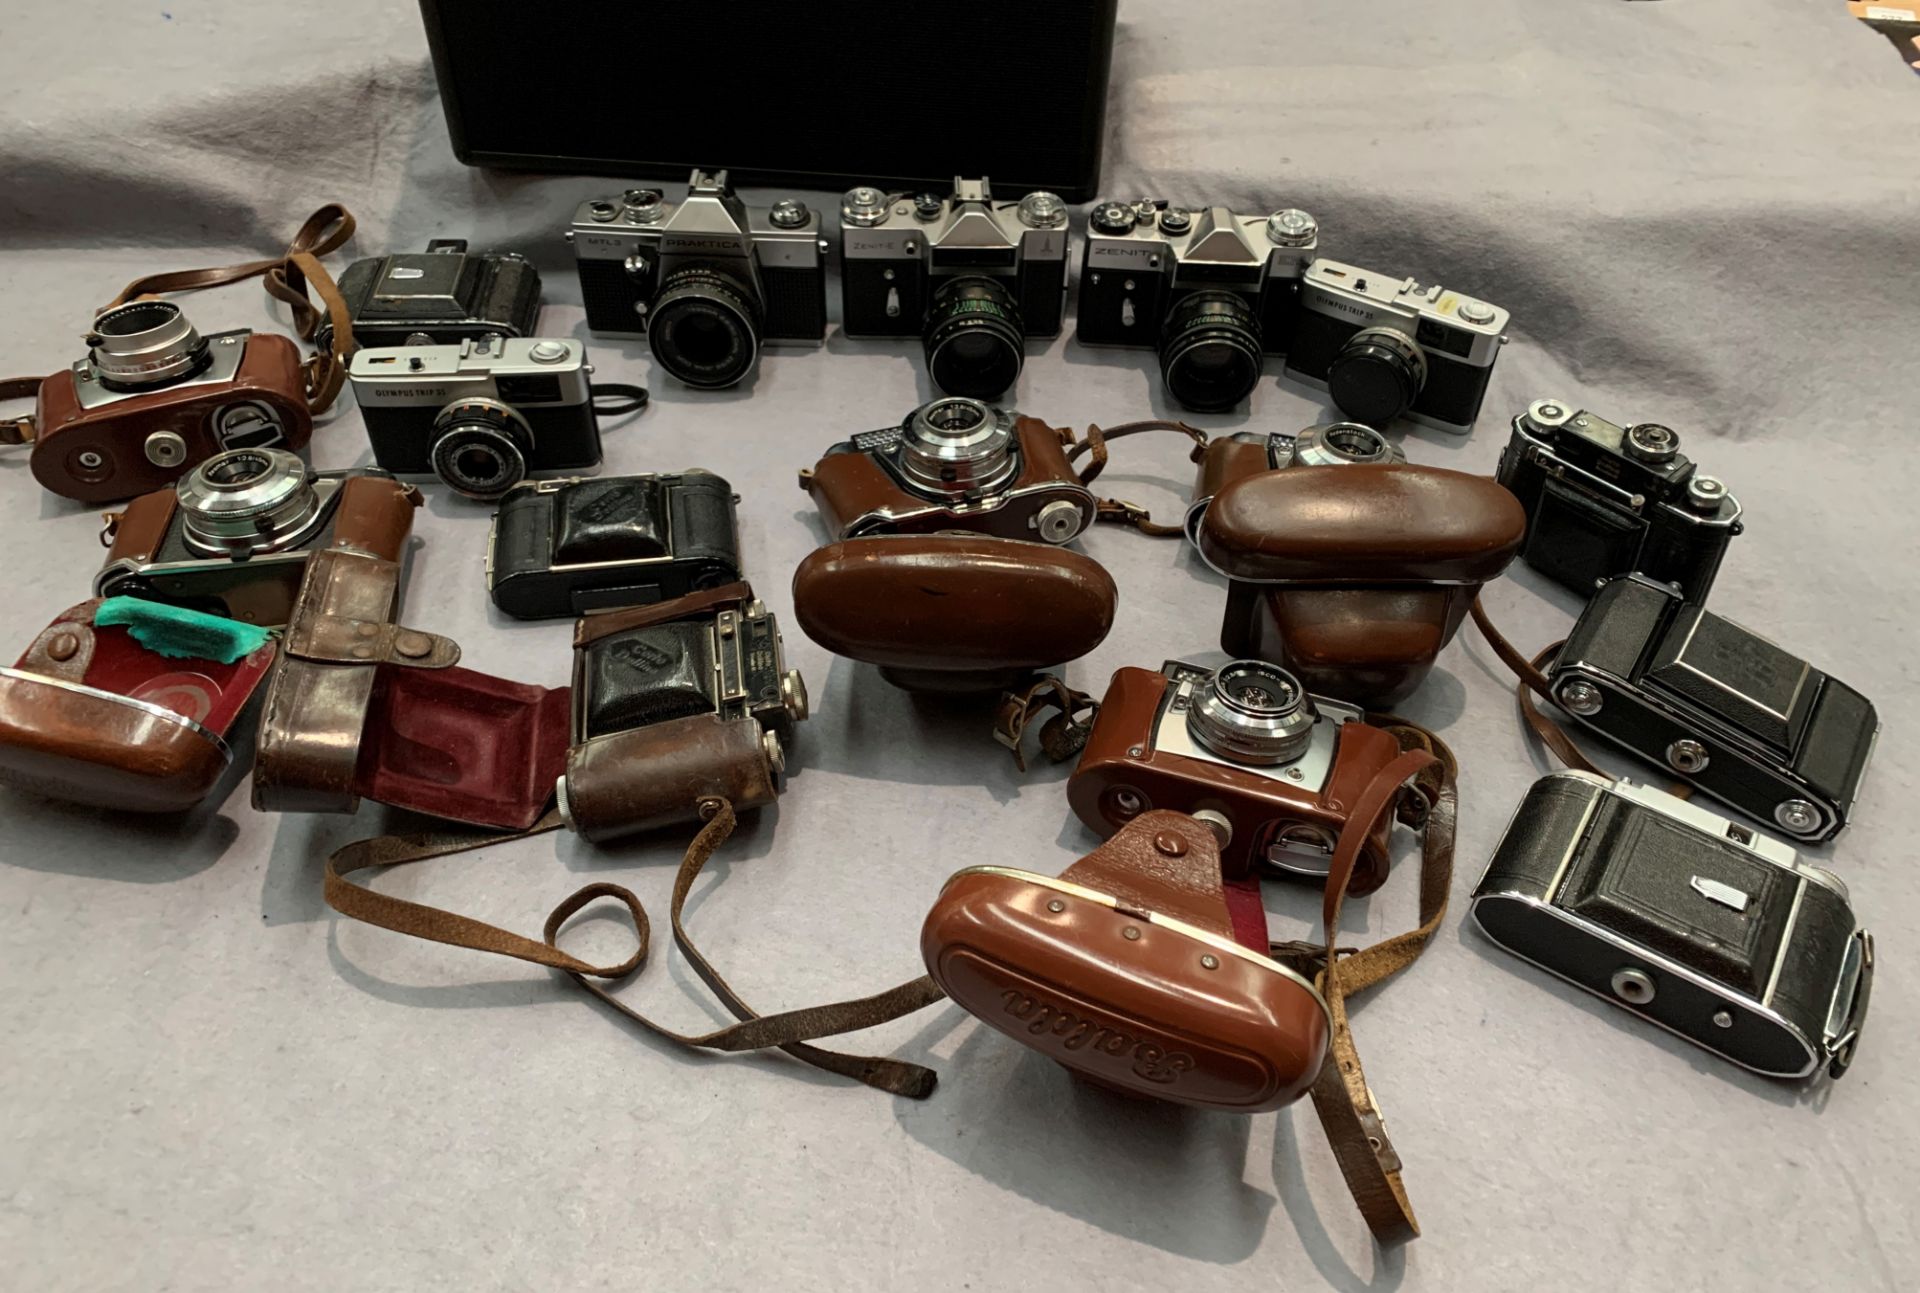 Folding portable case and contents - 16 x various folding and other cameras by Kodak, Zenit,